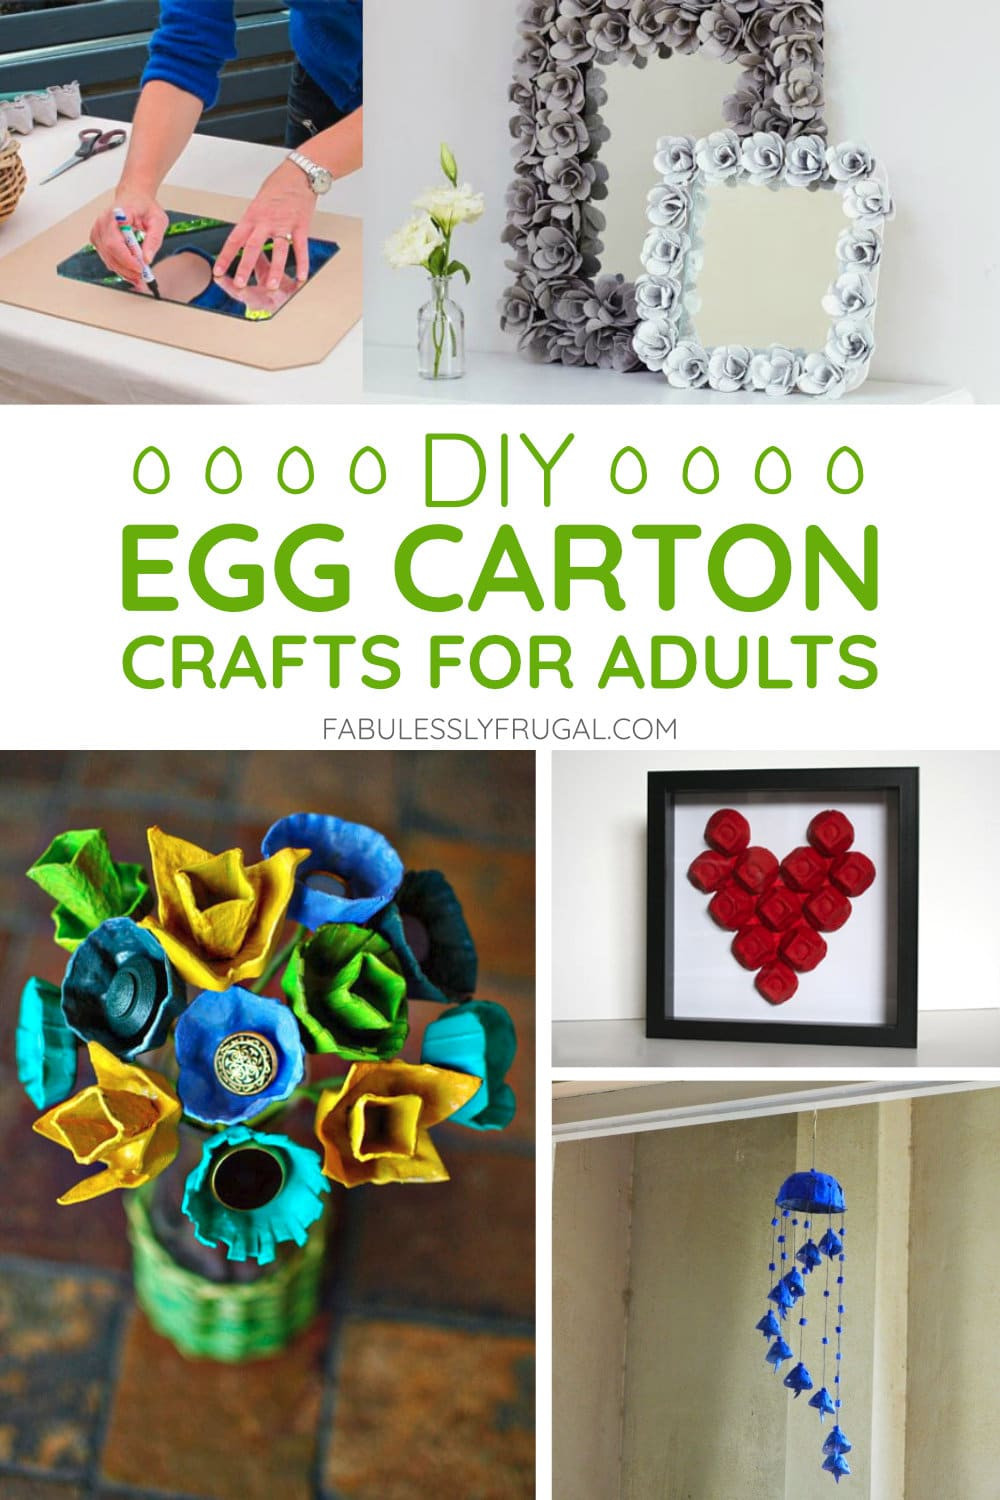 DIY Crafts For Adults
 5 Beautiful Egg Carton Crafts for Adults Fabulessly Frugal